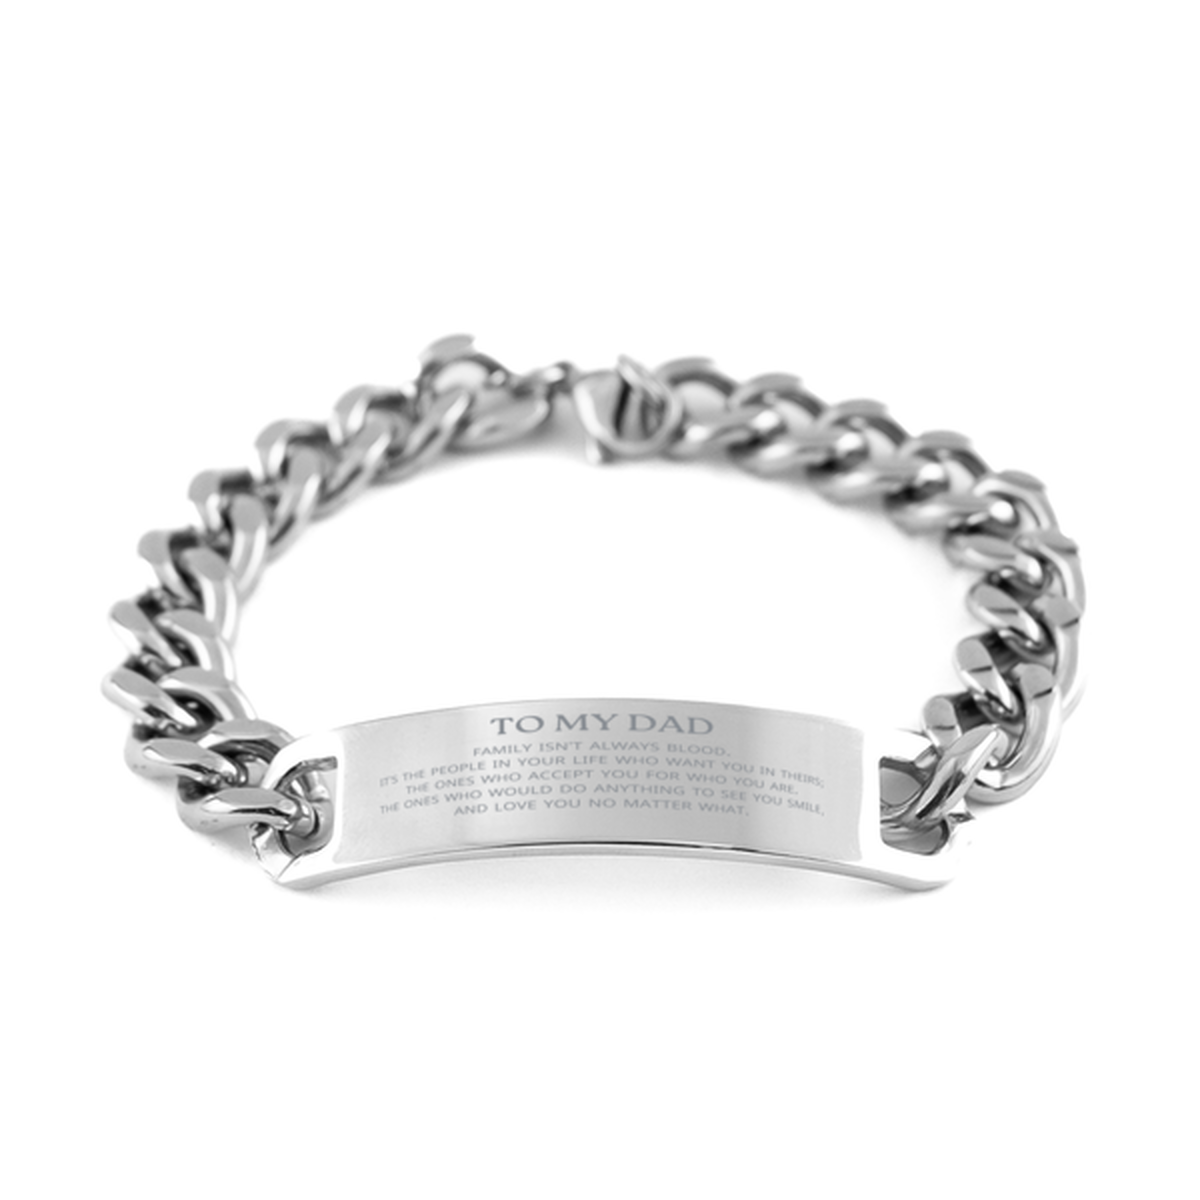 To My Dad Gifts, Family isn't always blood, Dad Cuban Chain Stainless Steel Bracelet, Birthday Christmas Unique Present For Dad